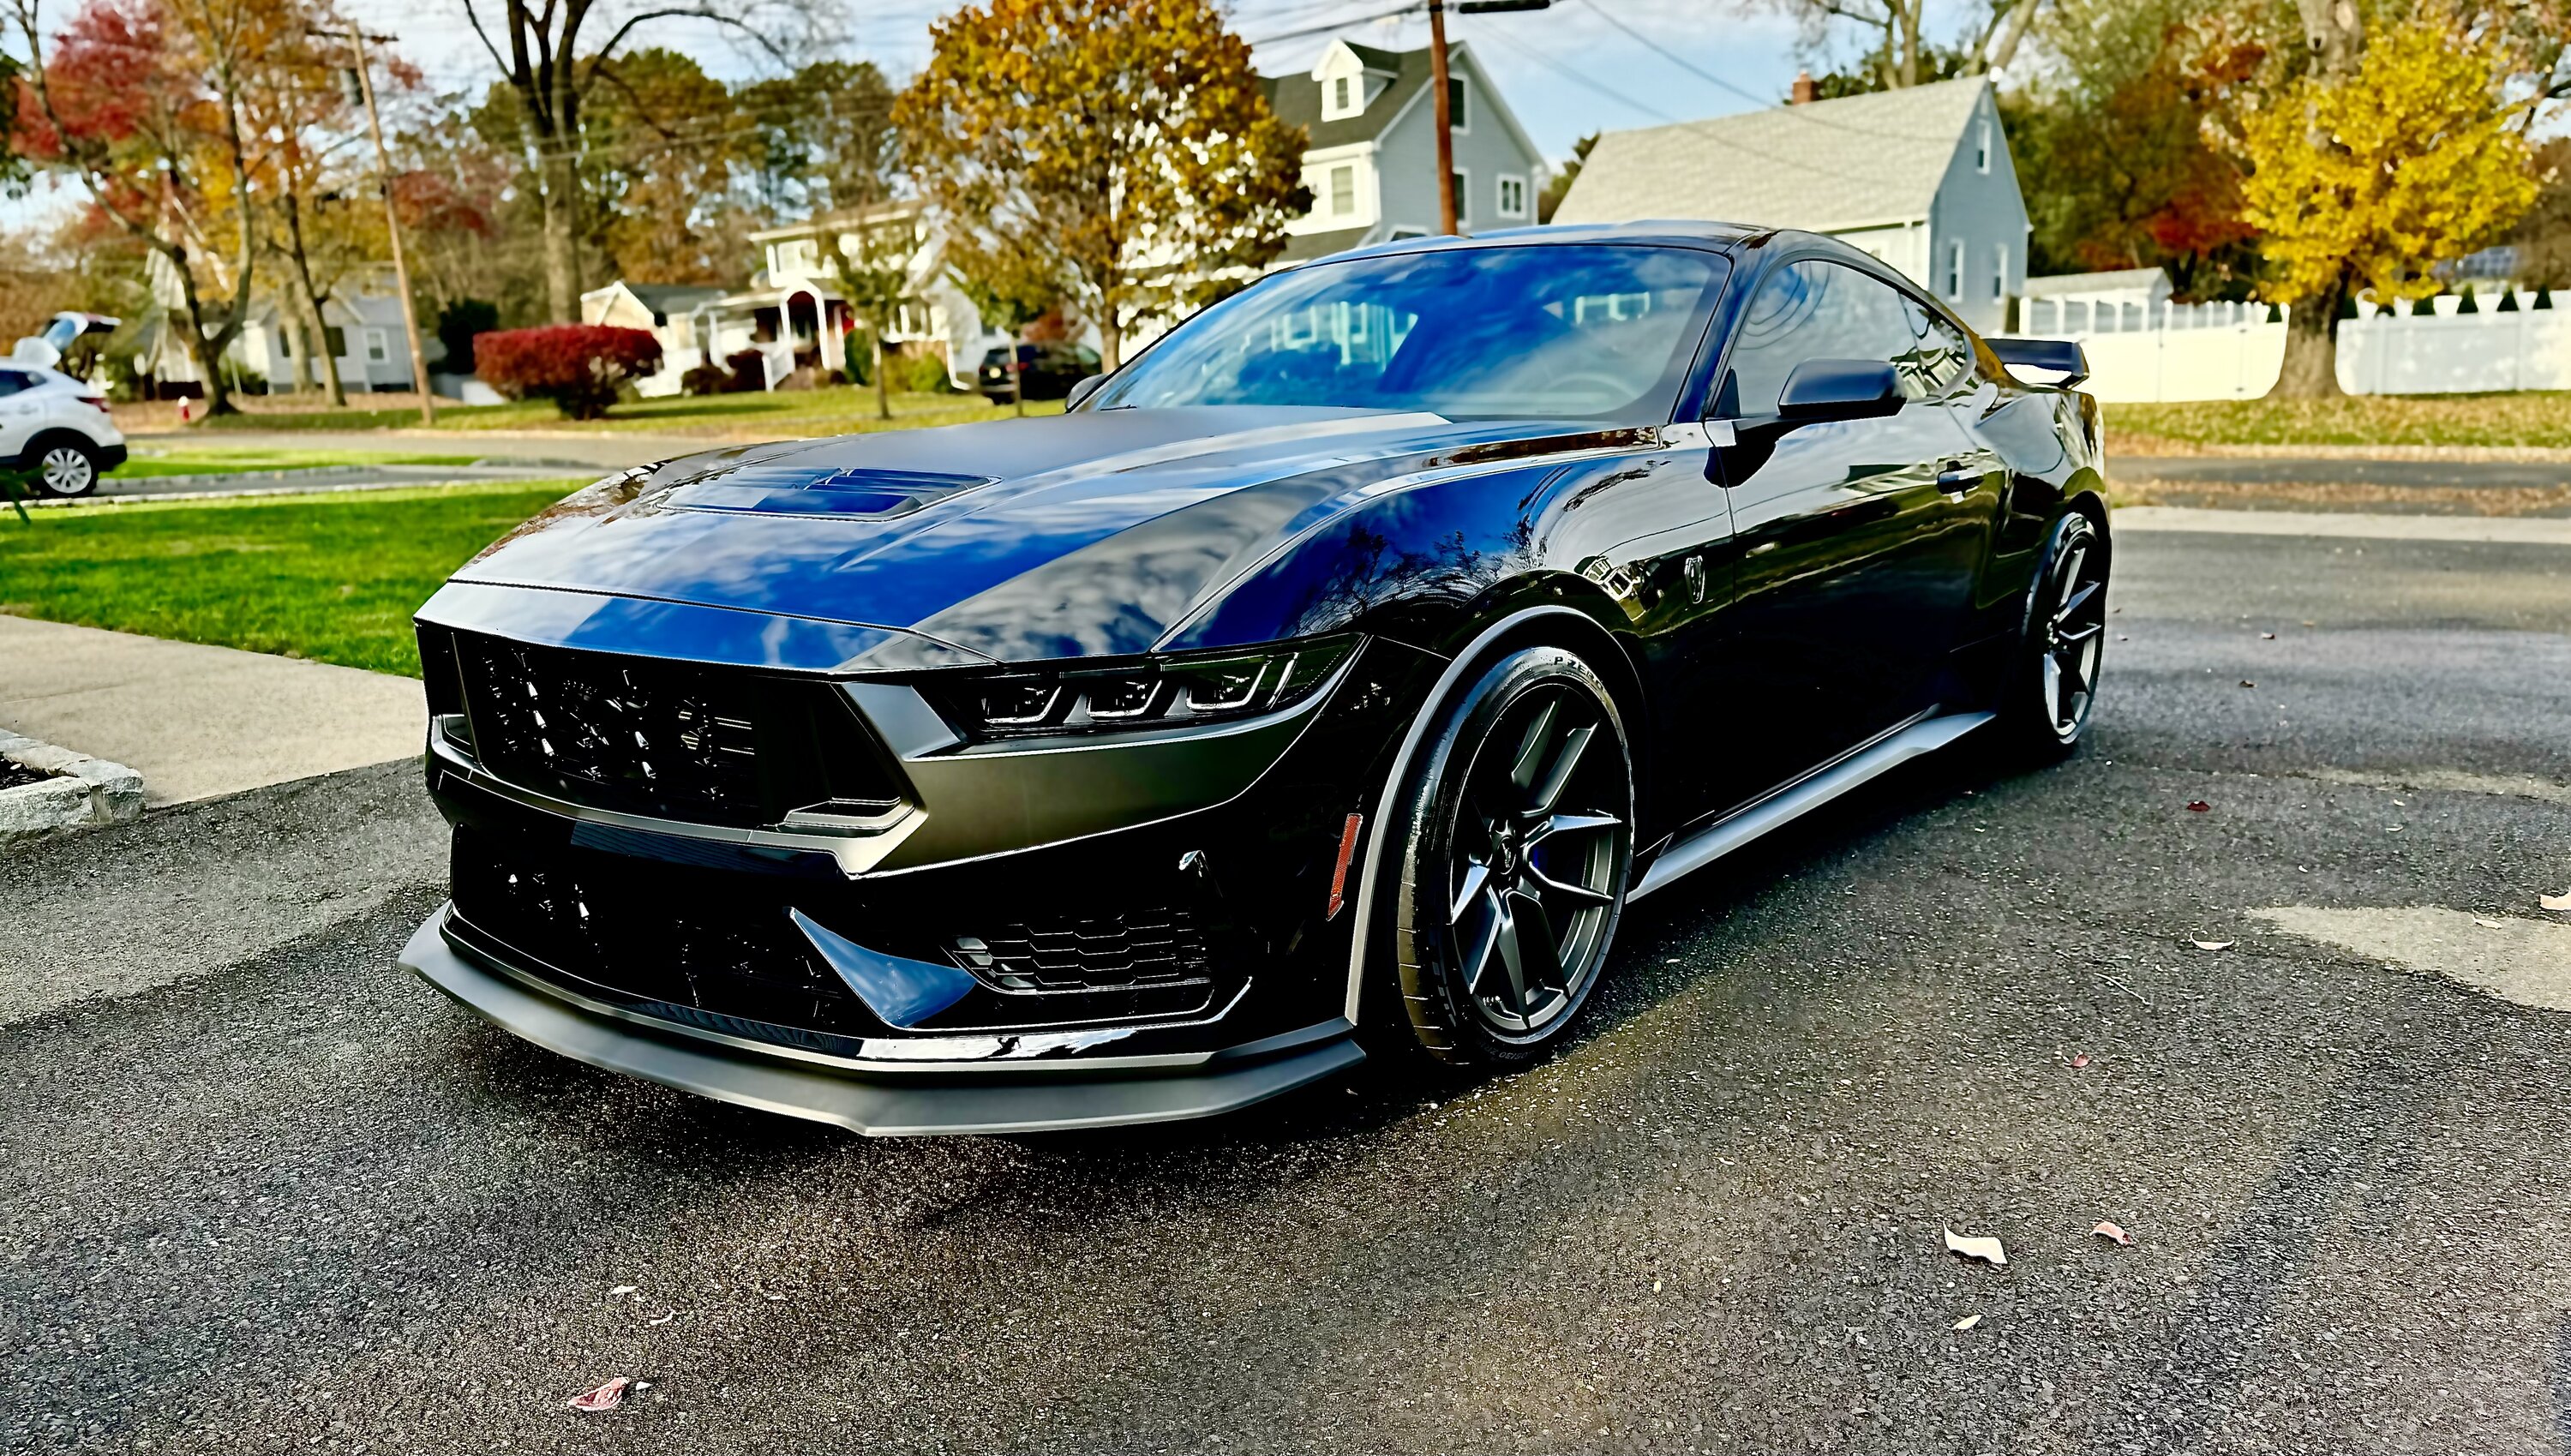 S650 Mustang Dark Horse - Delivered IMG_3030